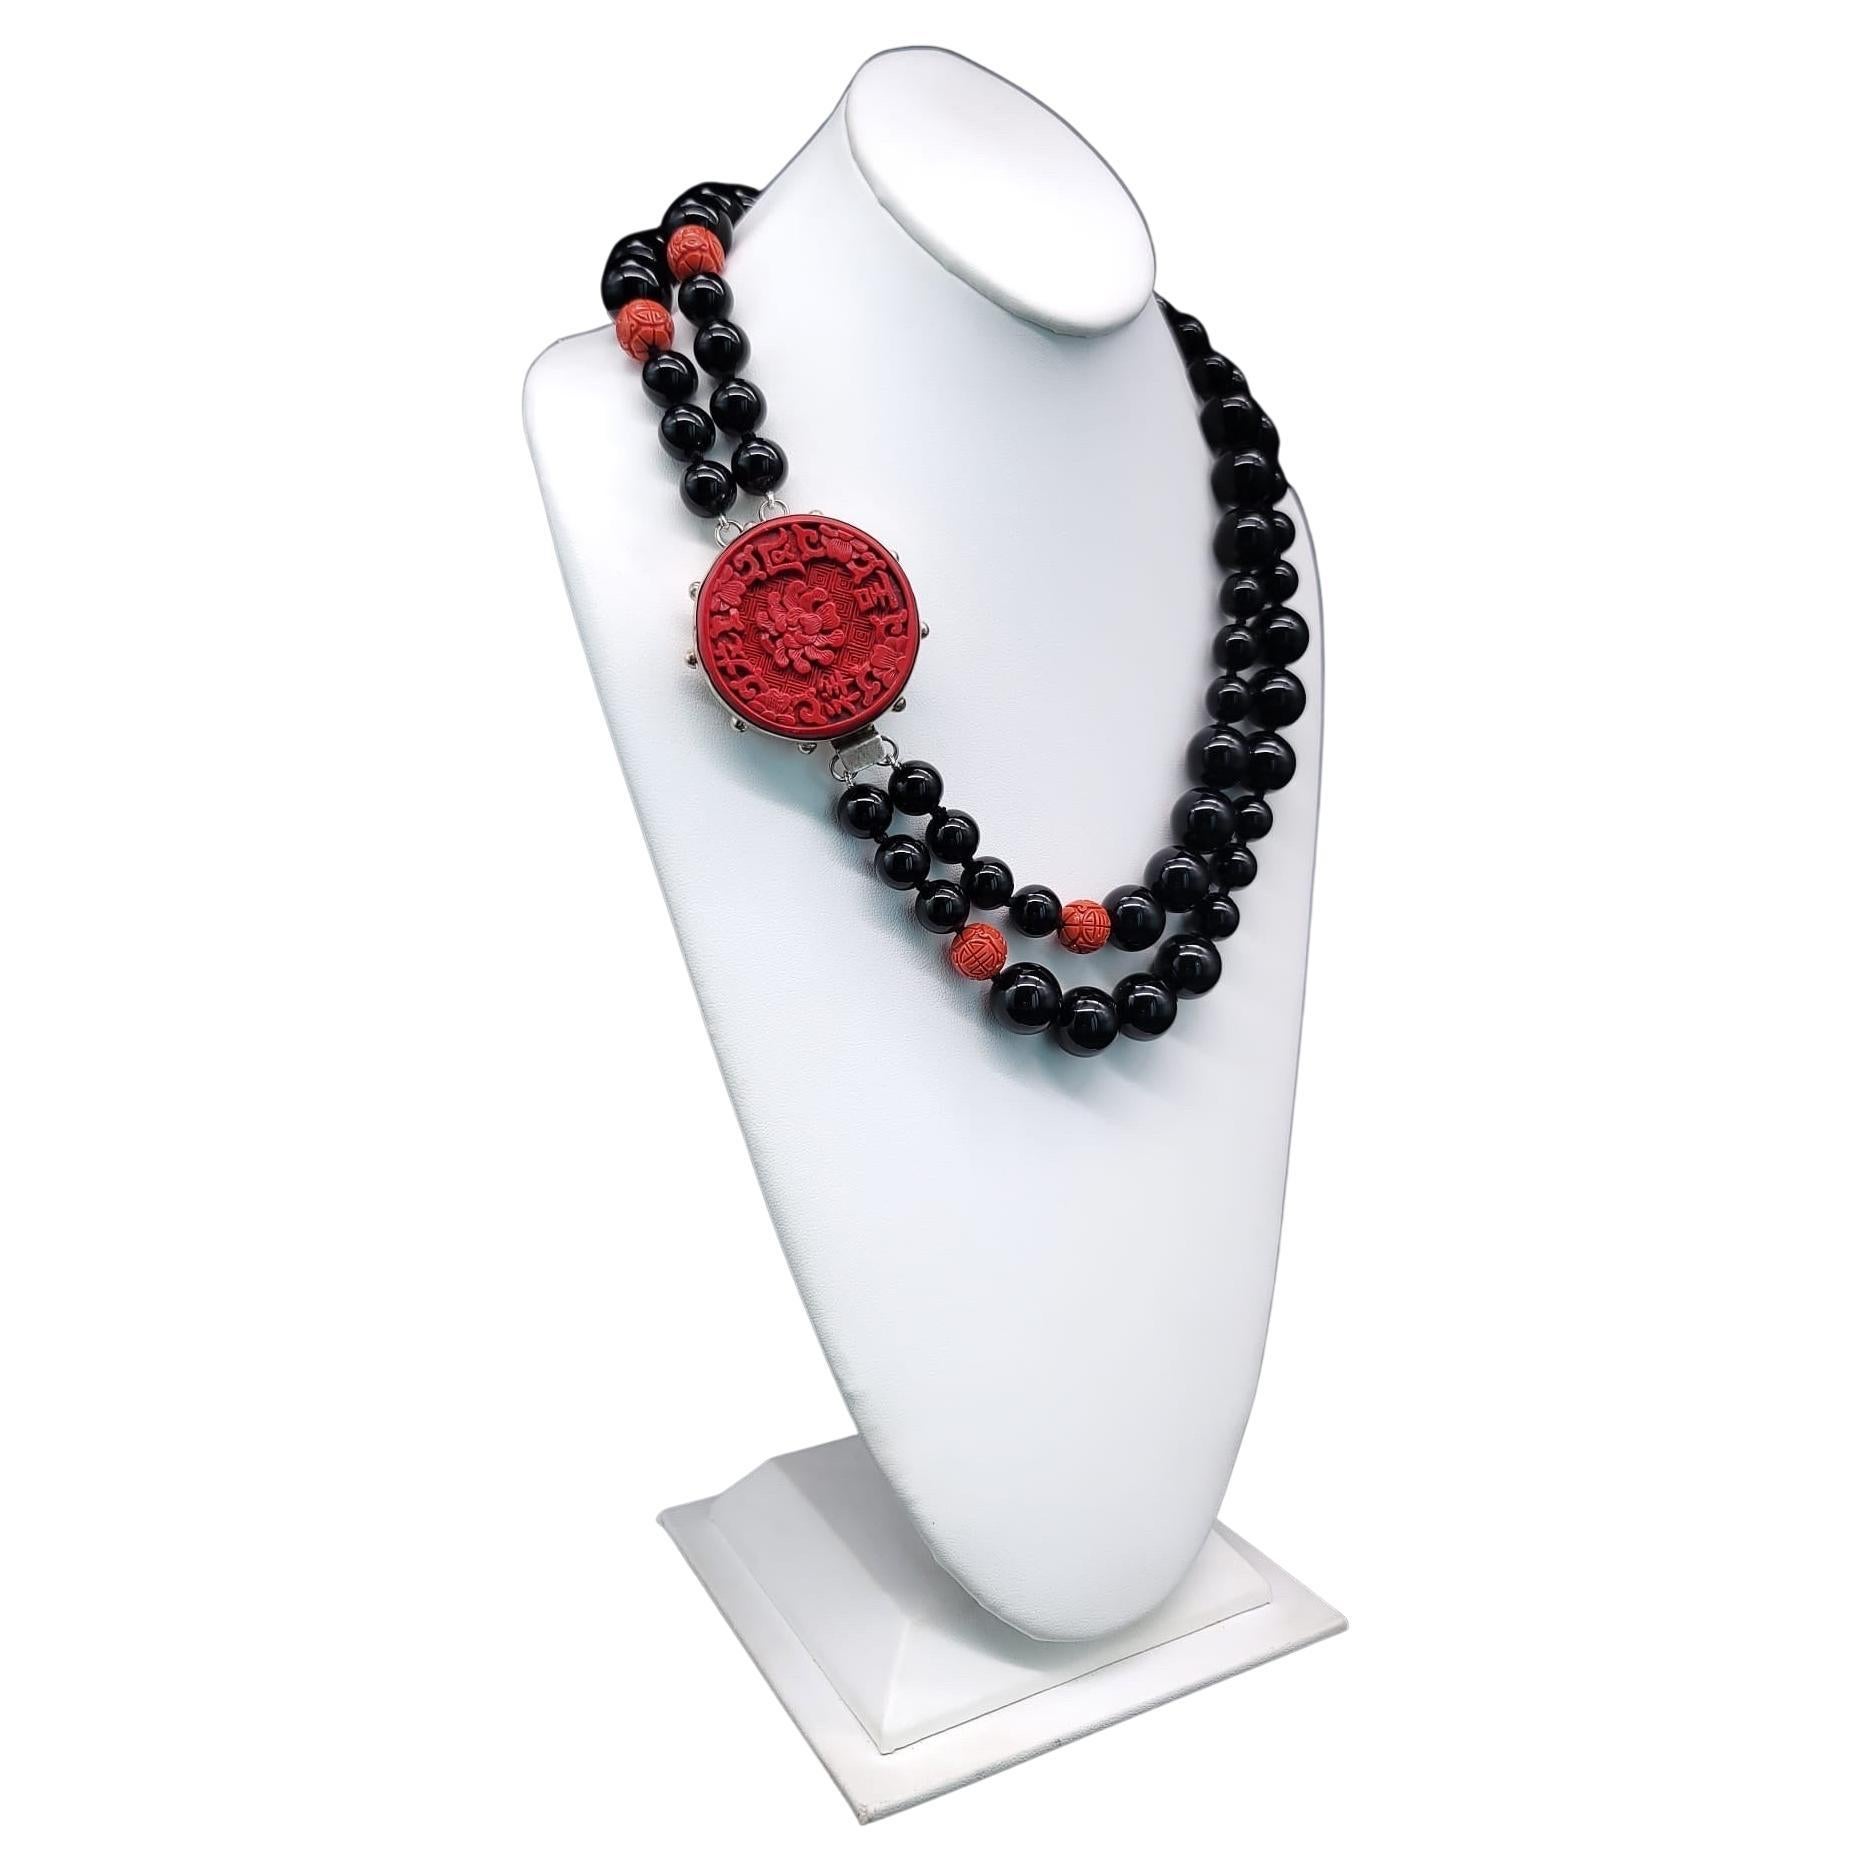 A.Jeschel Stunning Onyx necklace with carved Cinnabar clasp.